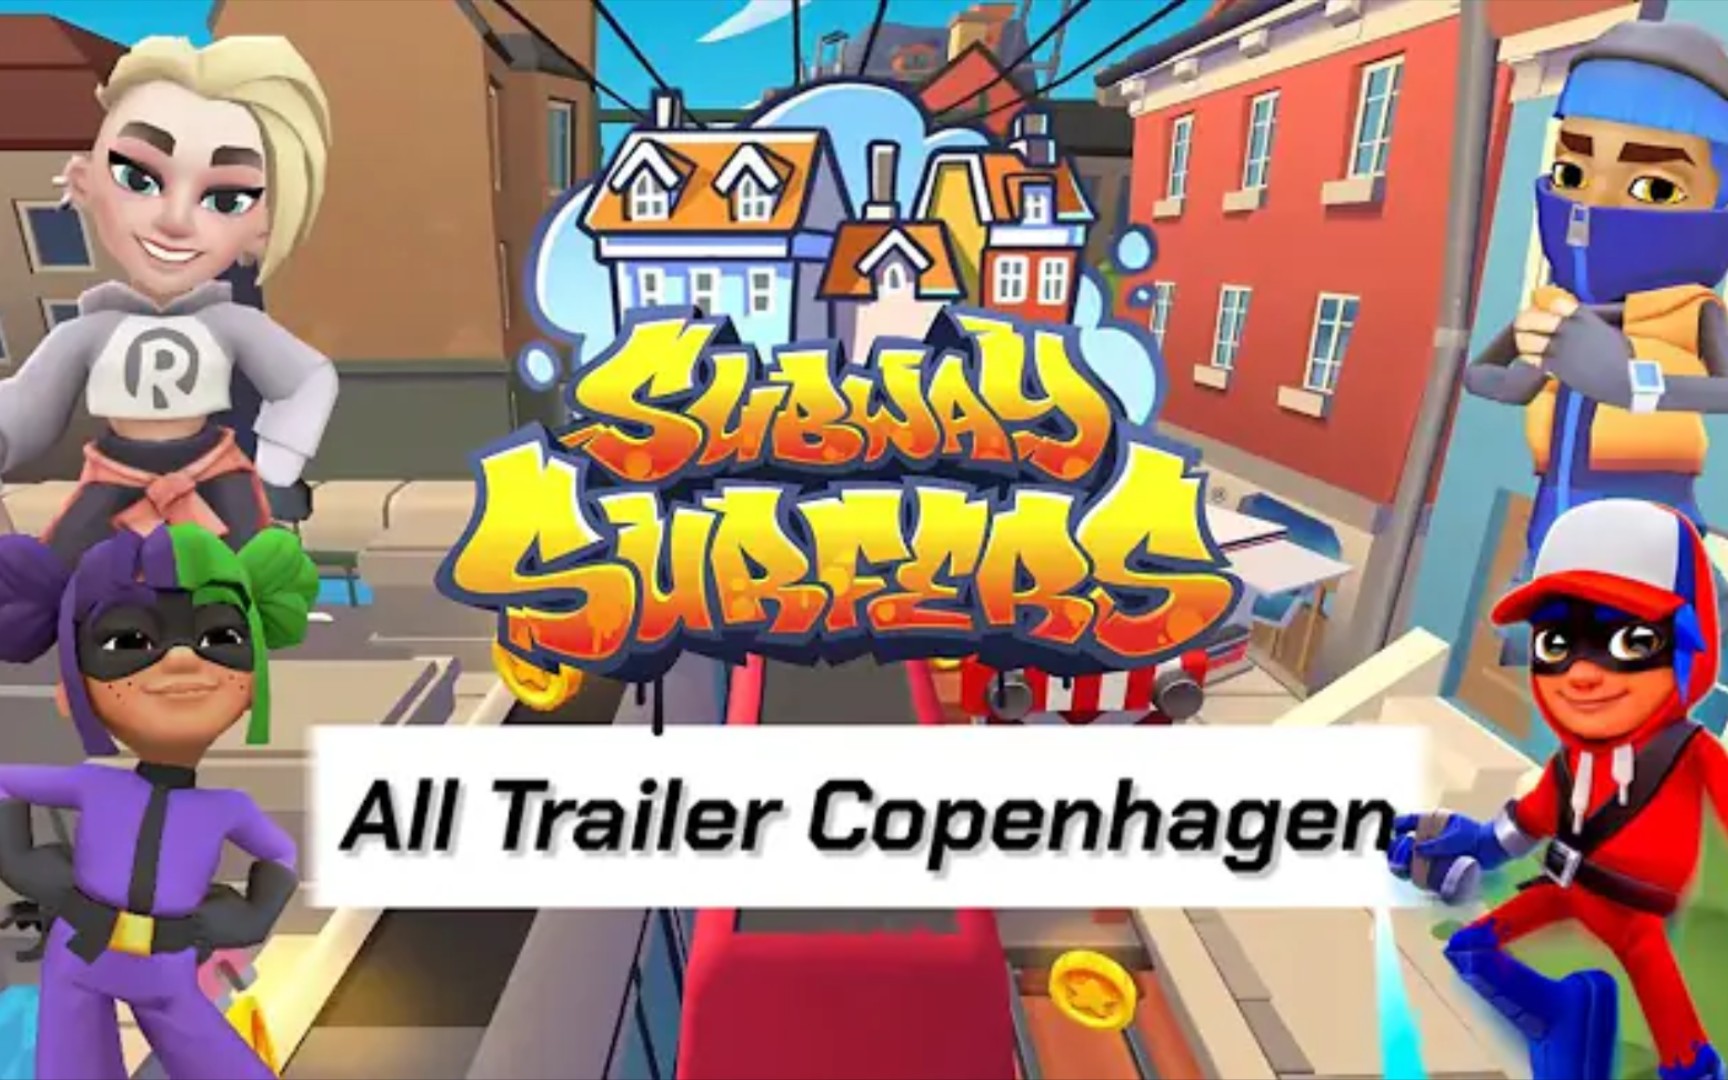 Subway Surfers World Tour 2019 - Chicago (Official Trailer) 